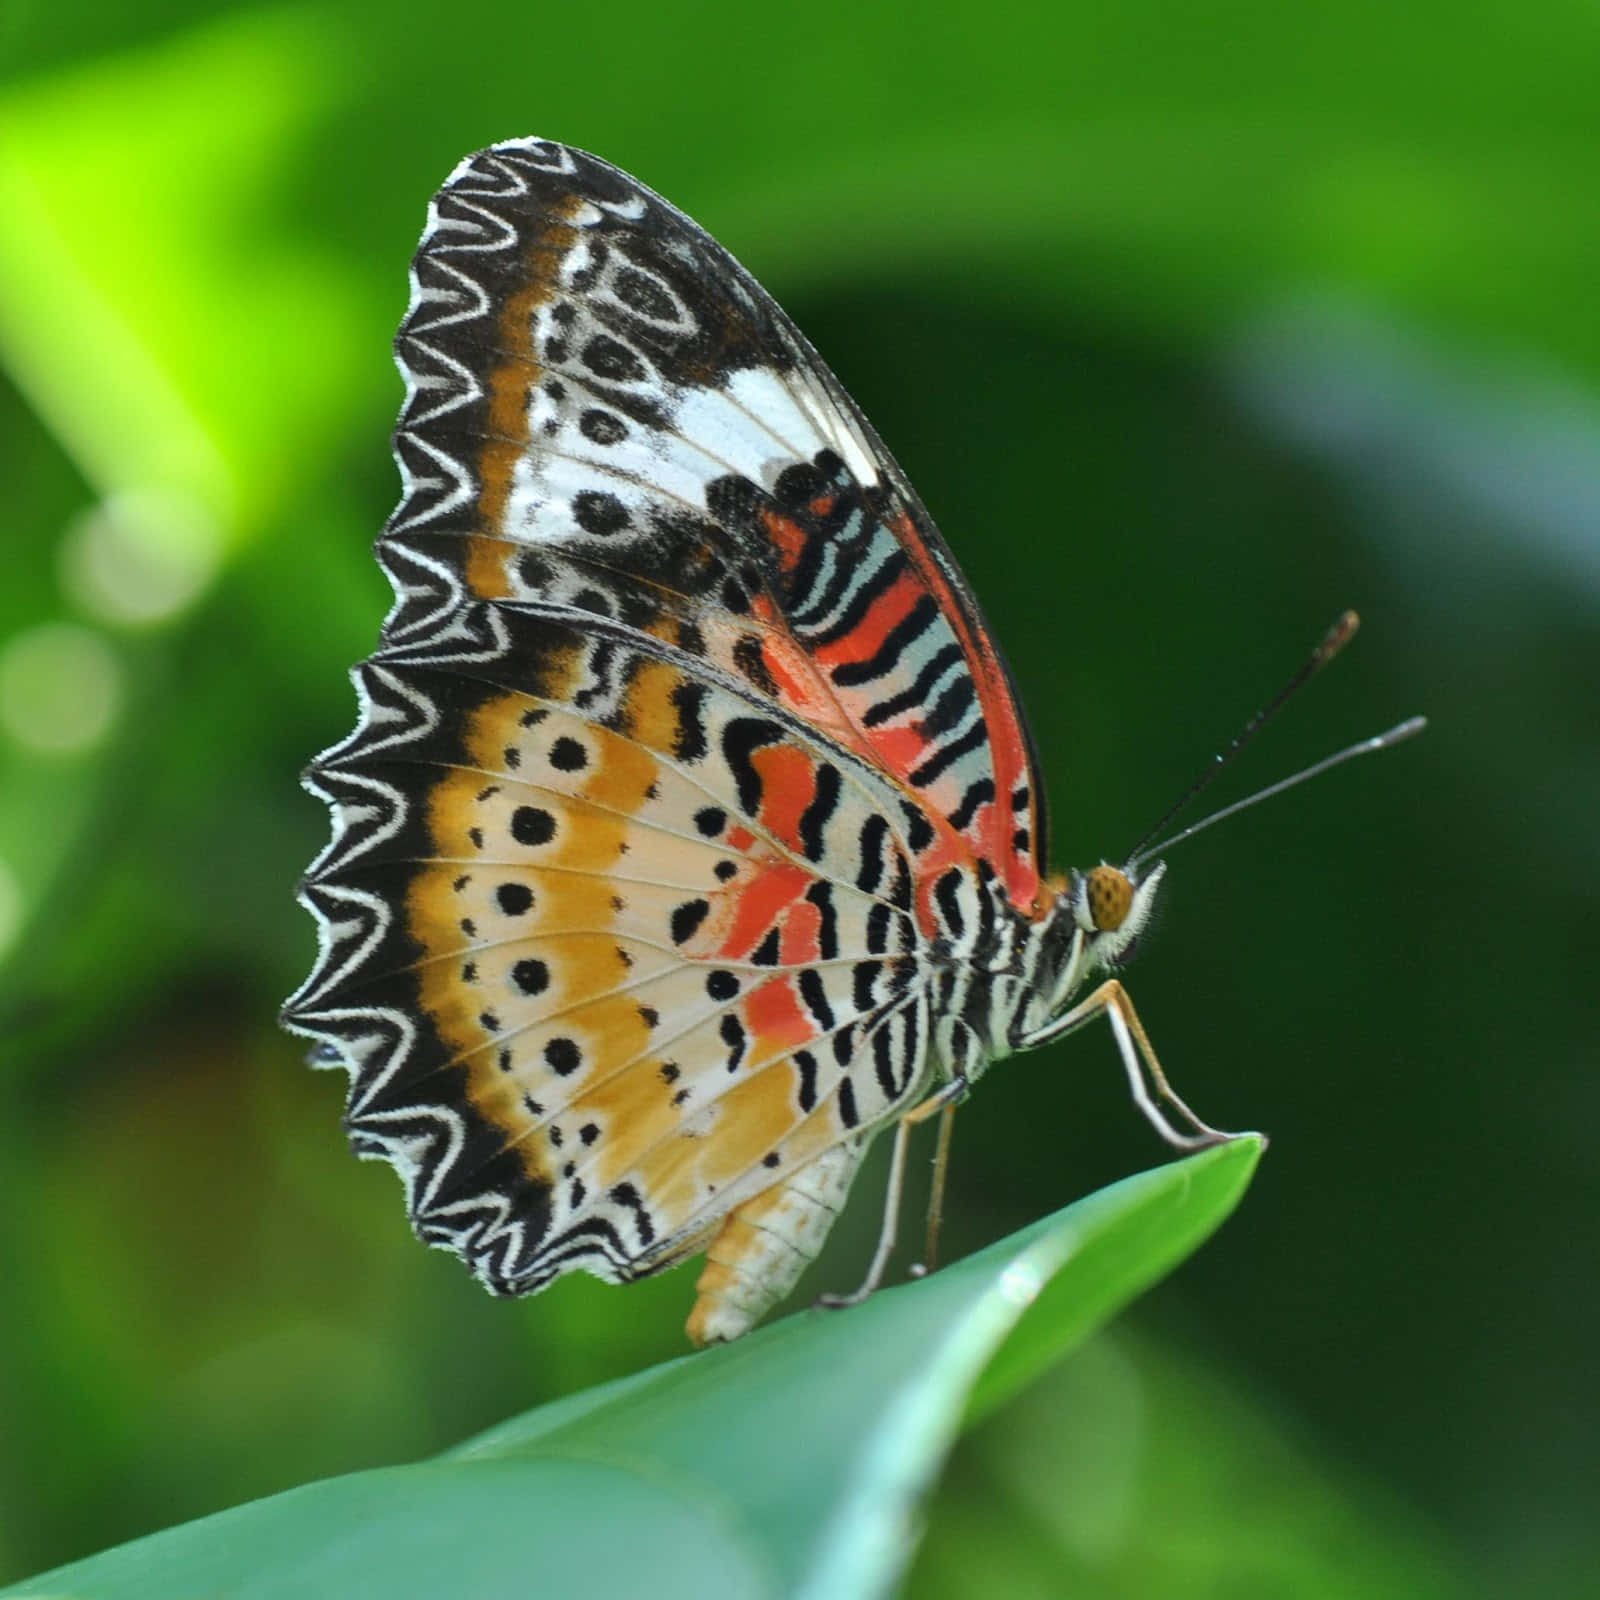 A bright and colorful butterfly perched on a flower